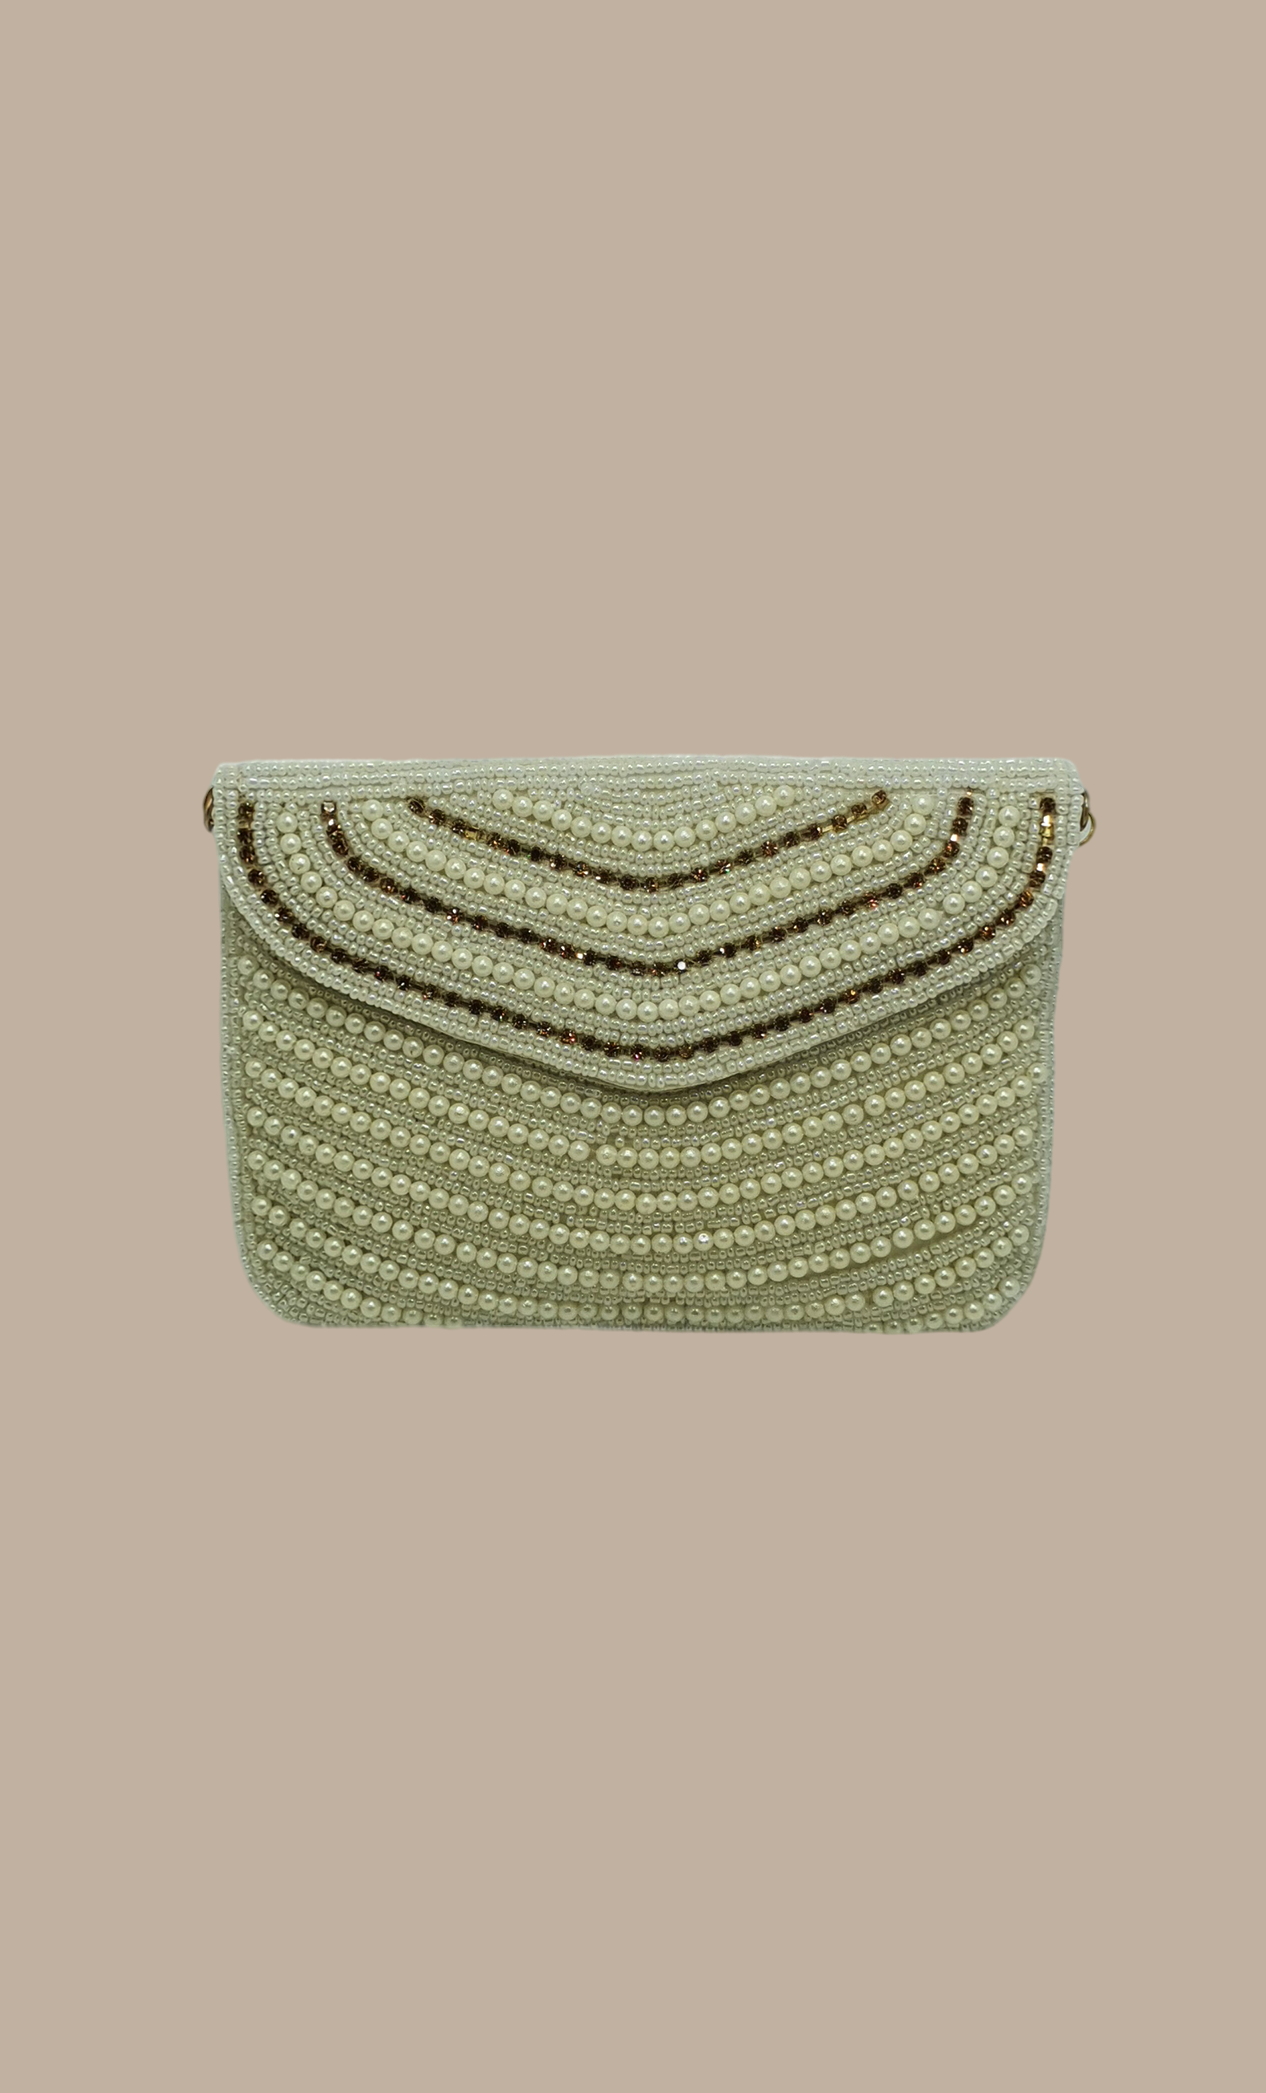 Pearl Work & Bead Work Embroidered Clutch